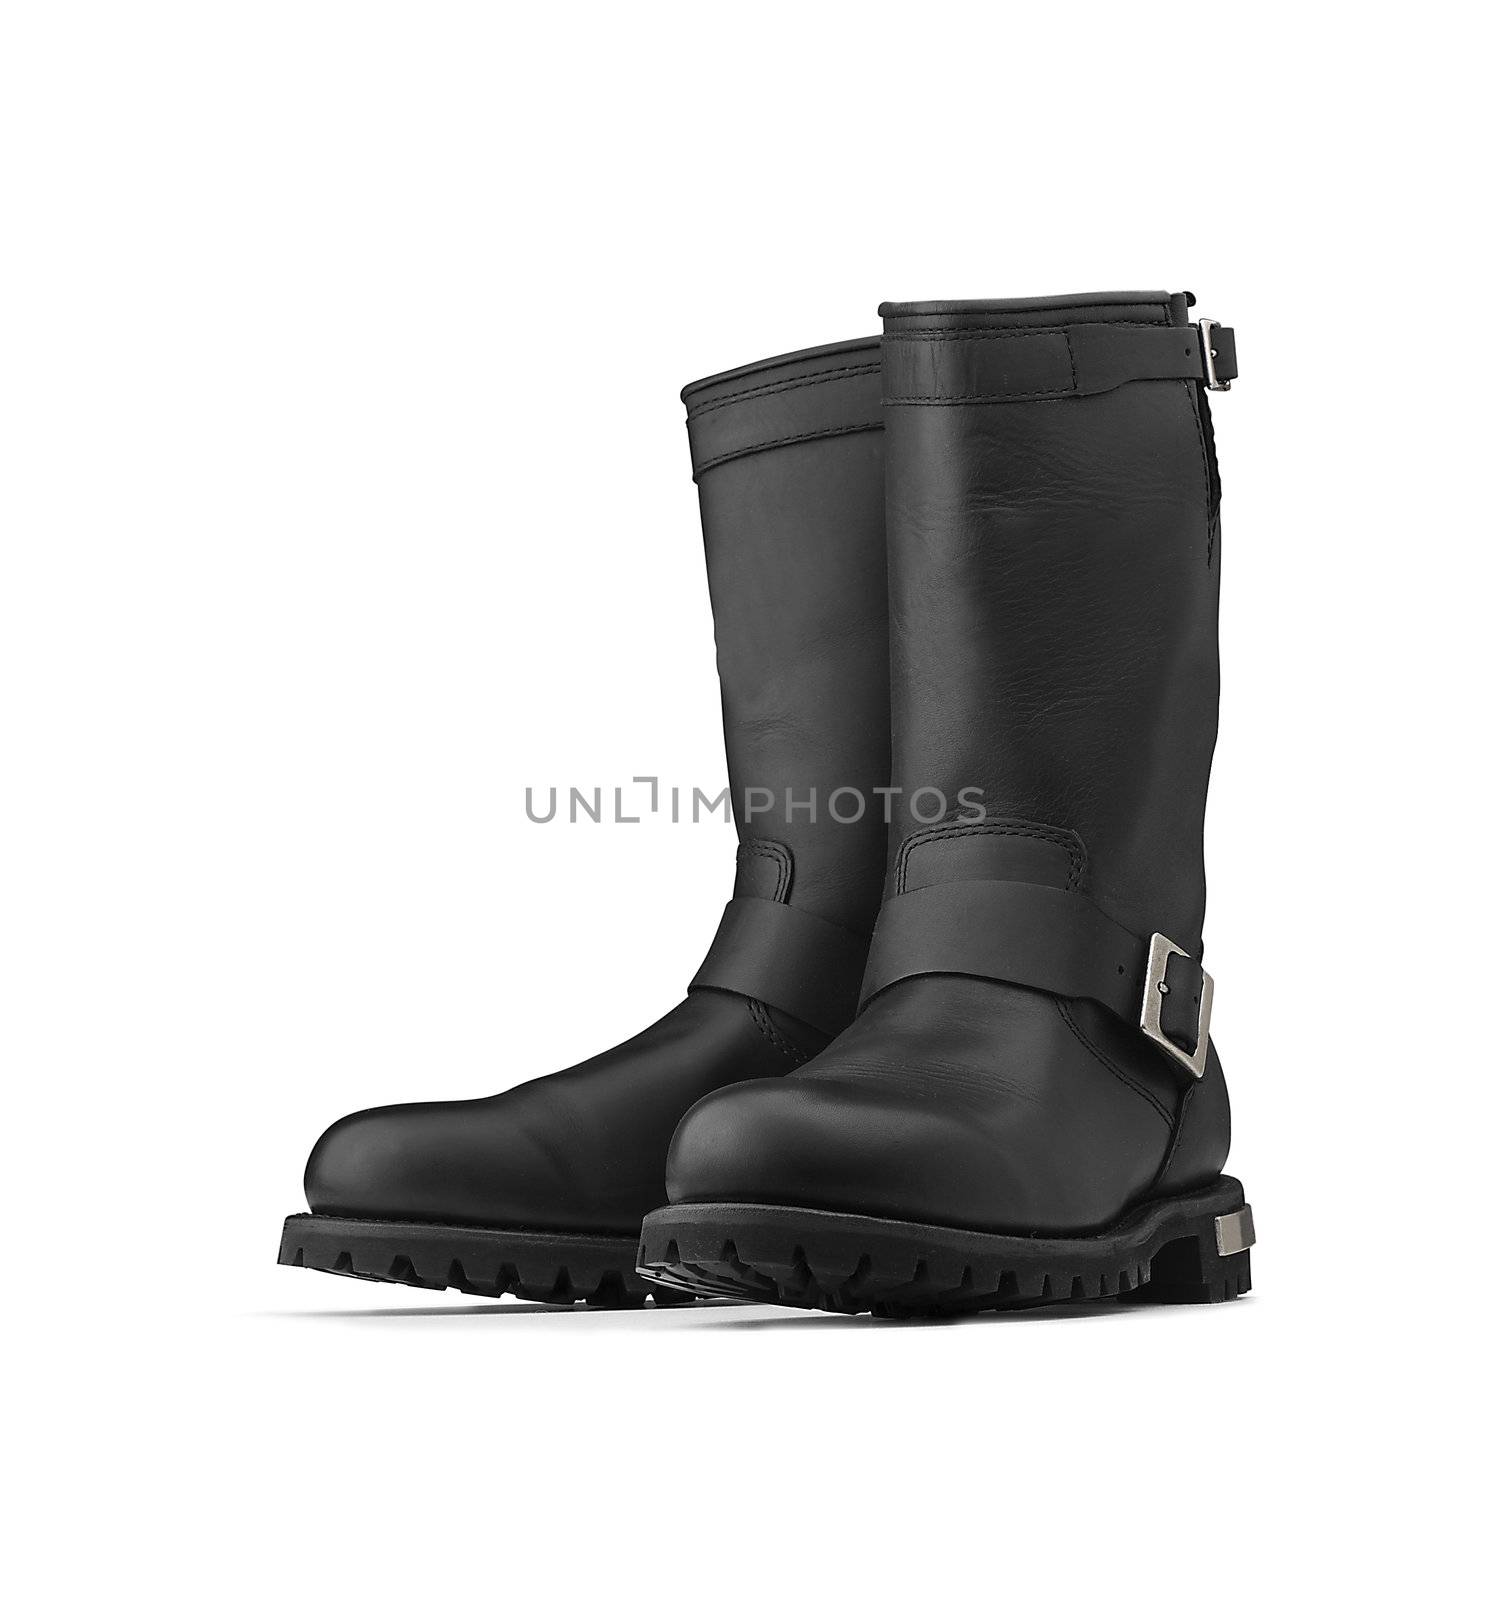 Pair of black boots (clipping path)